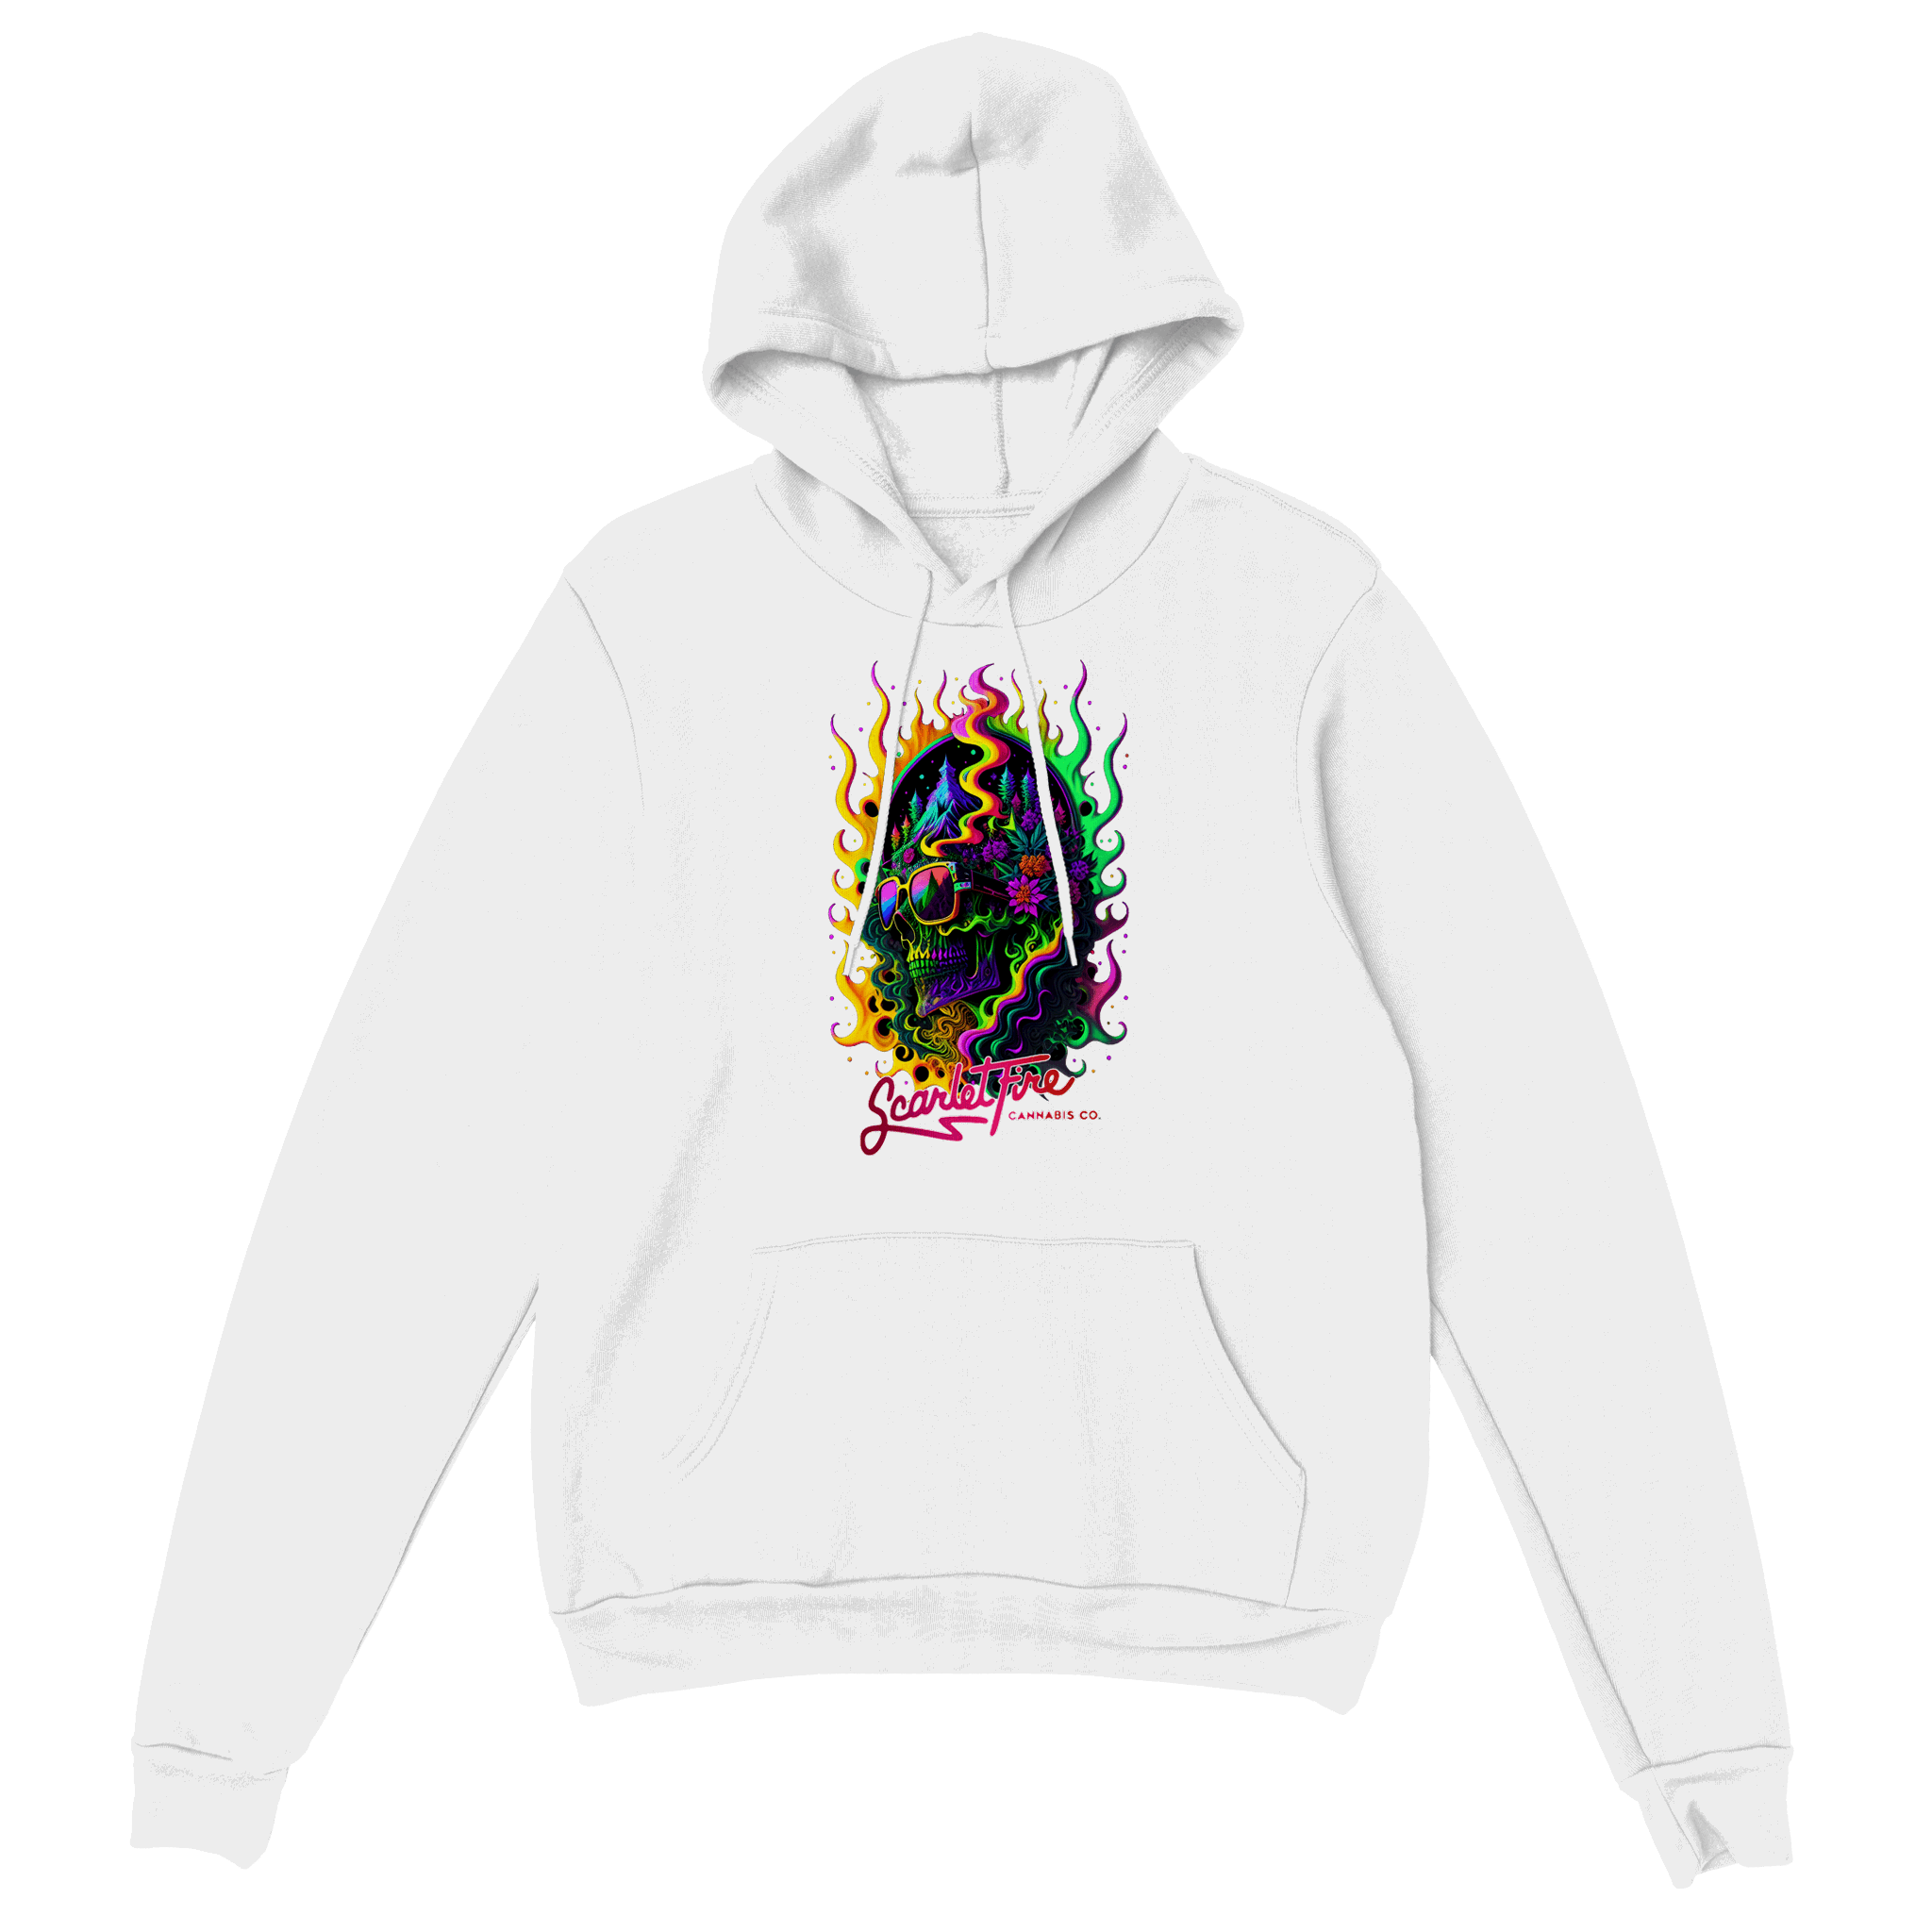 Official Licensed Scarlet Fire Cannabis Co Premium Unisex Pullover Hoodie